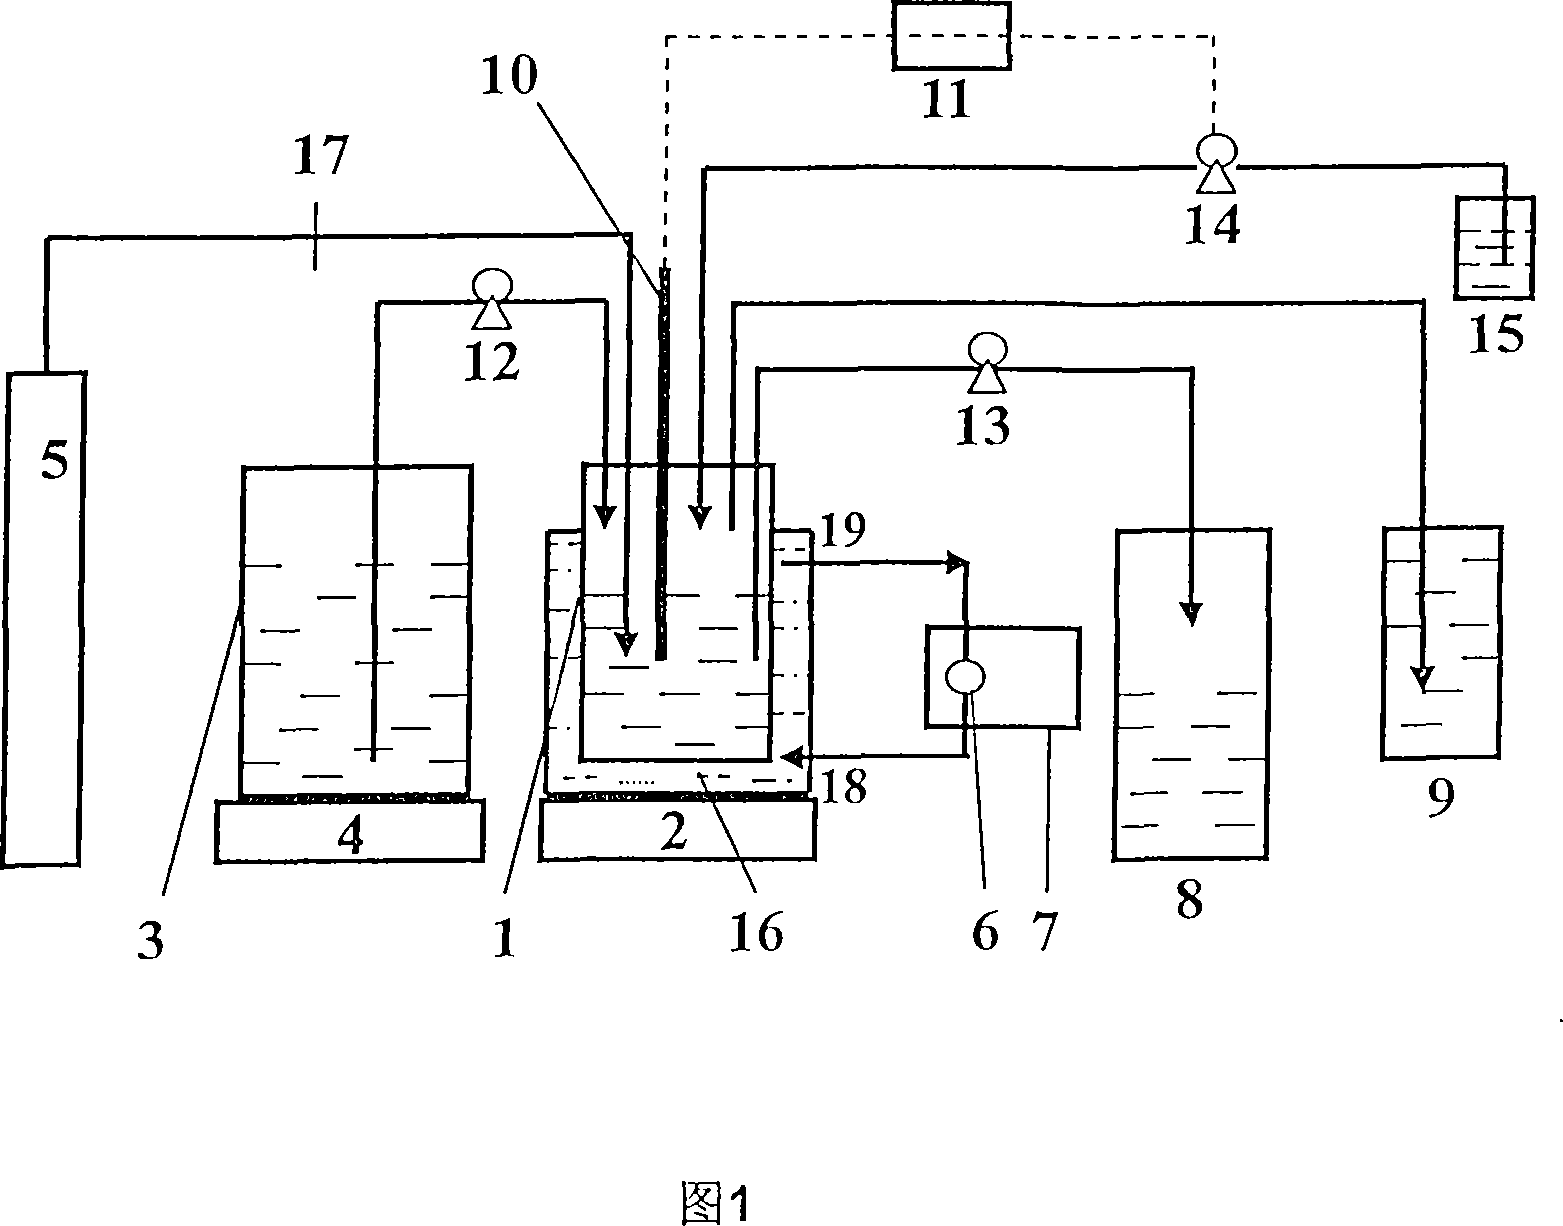 Intestinal flora isolated culturing device